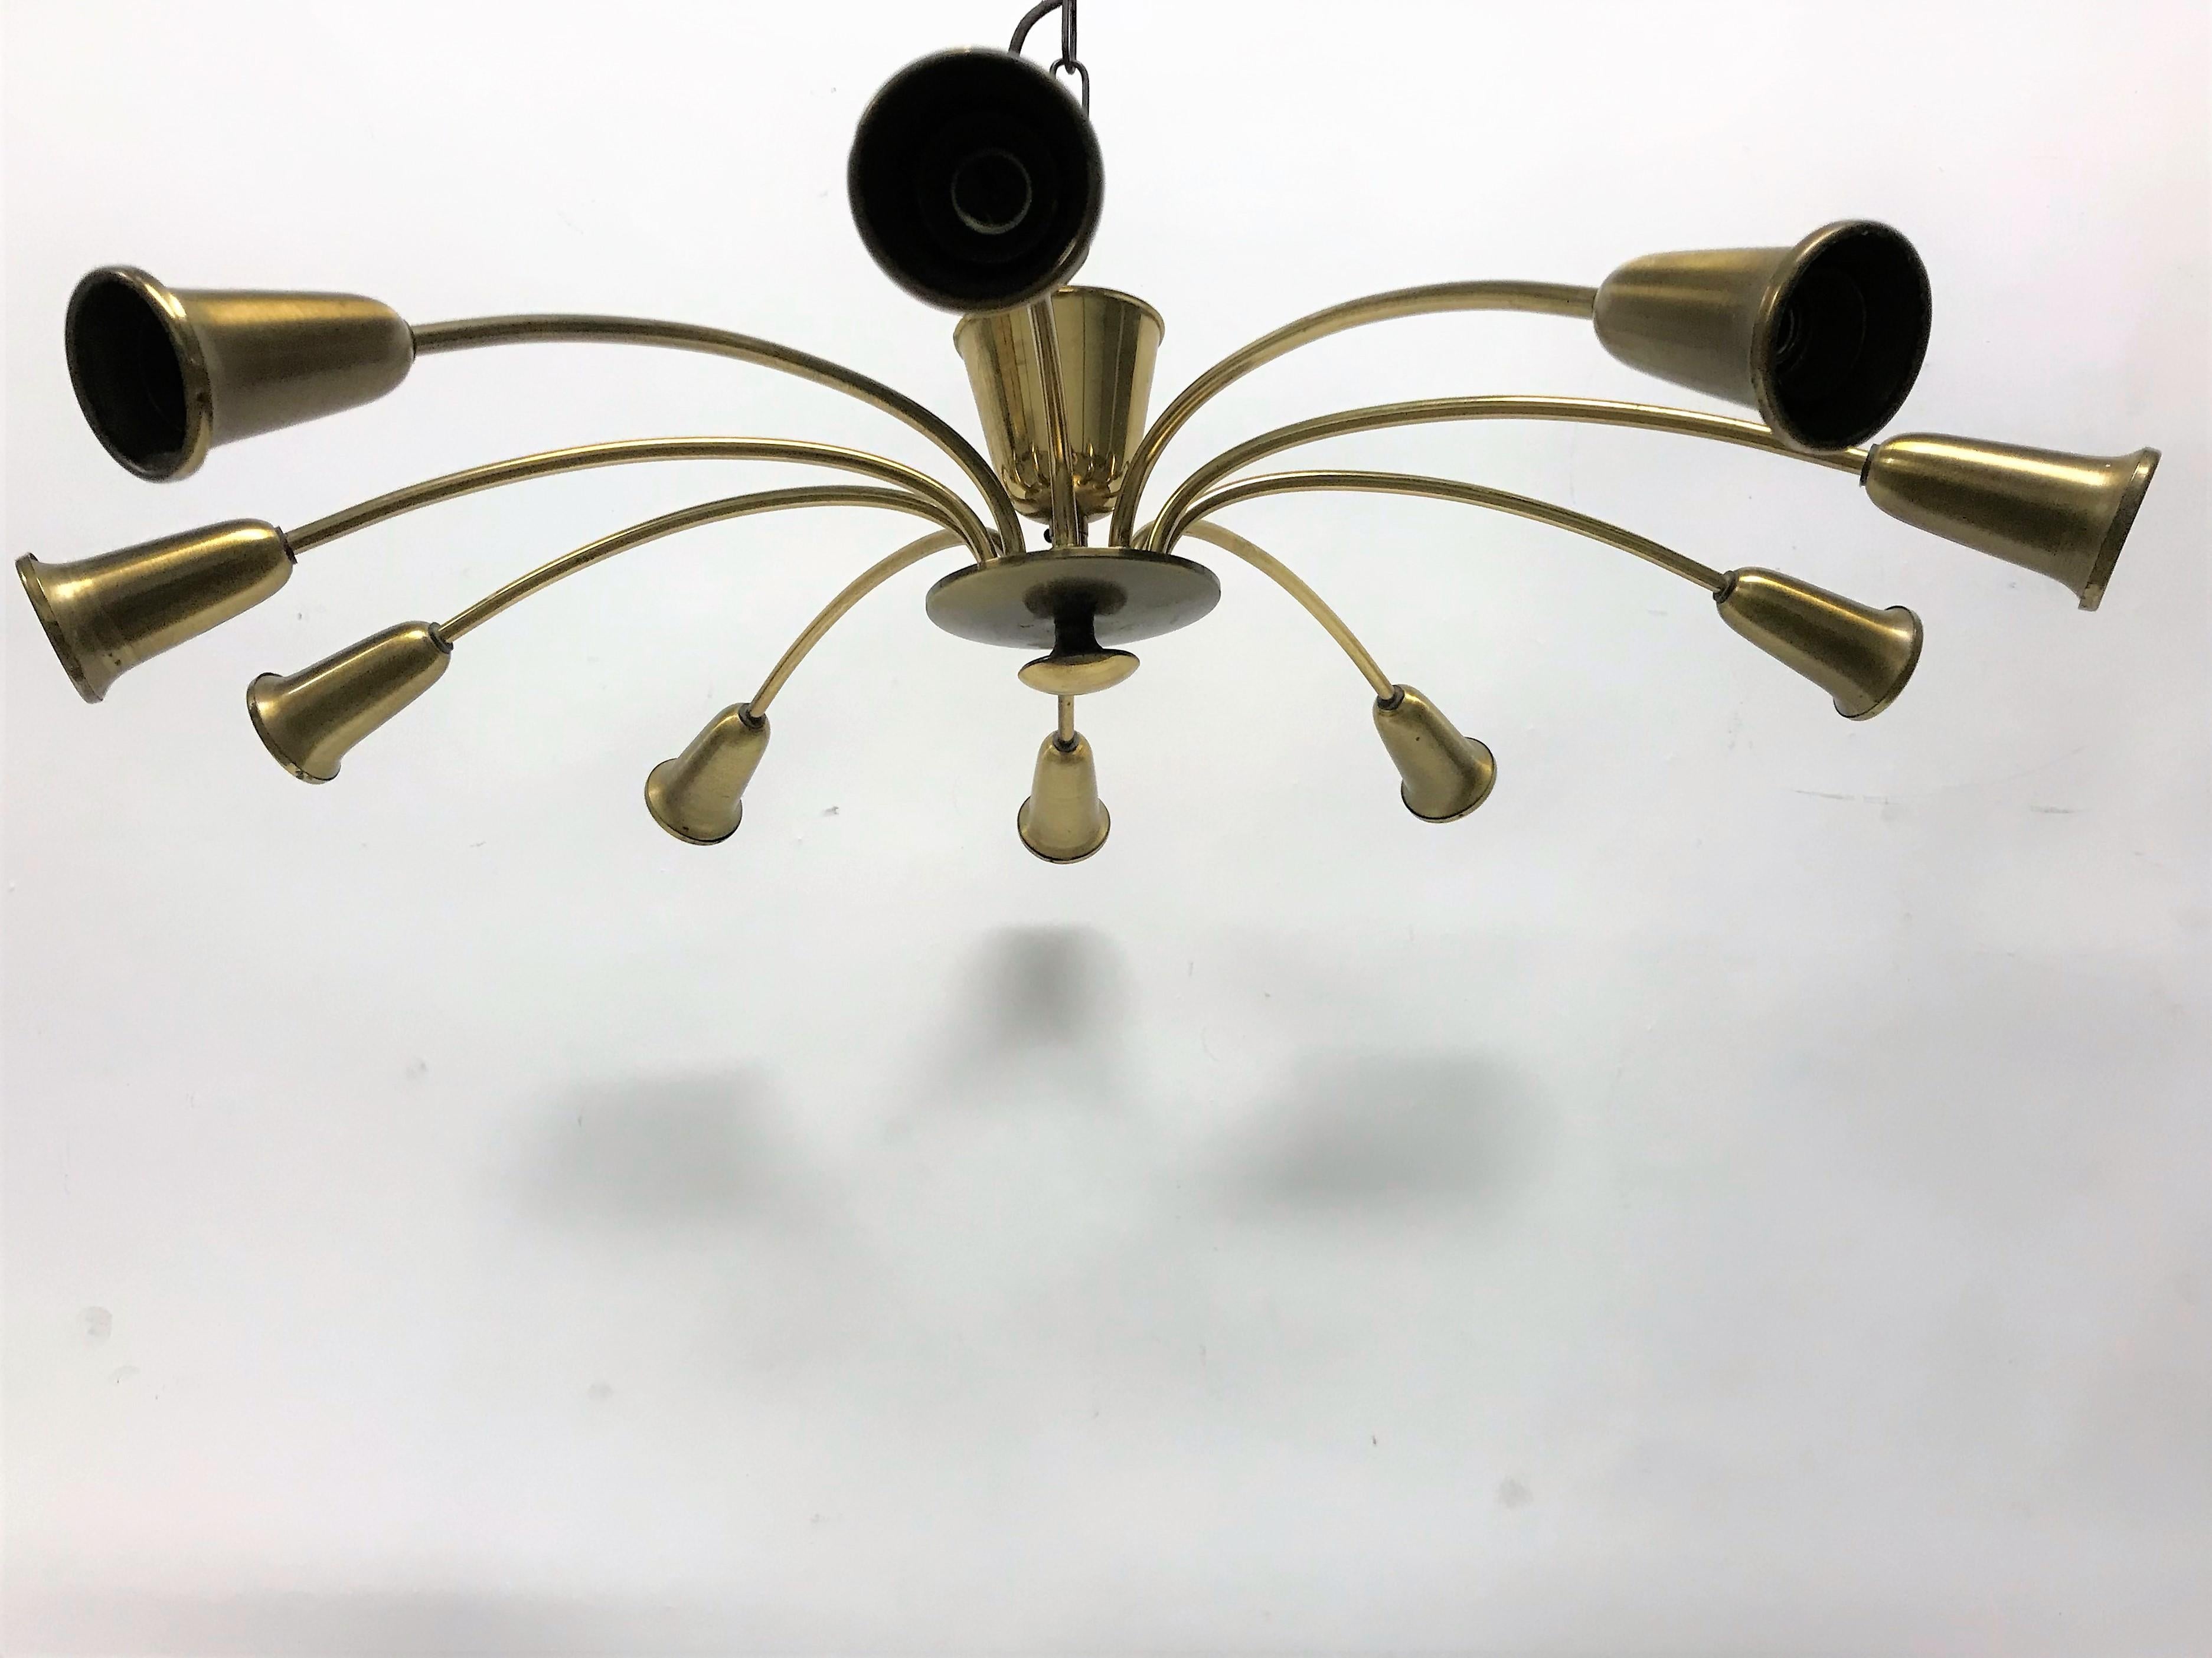 Brass spider chandelier with 10-light points.

The brass is slightly patinated, giving the light it's authentic character.

Tested and ready to use. Works with regular E14 light bulbs.

1960s, Italy

Dimensions:
Diameter 68 cm/ 27